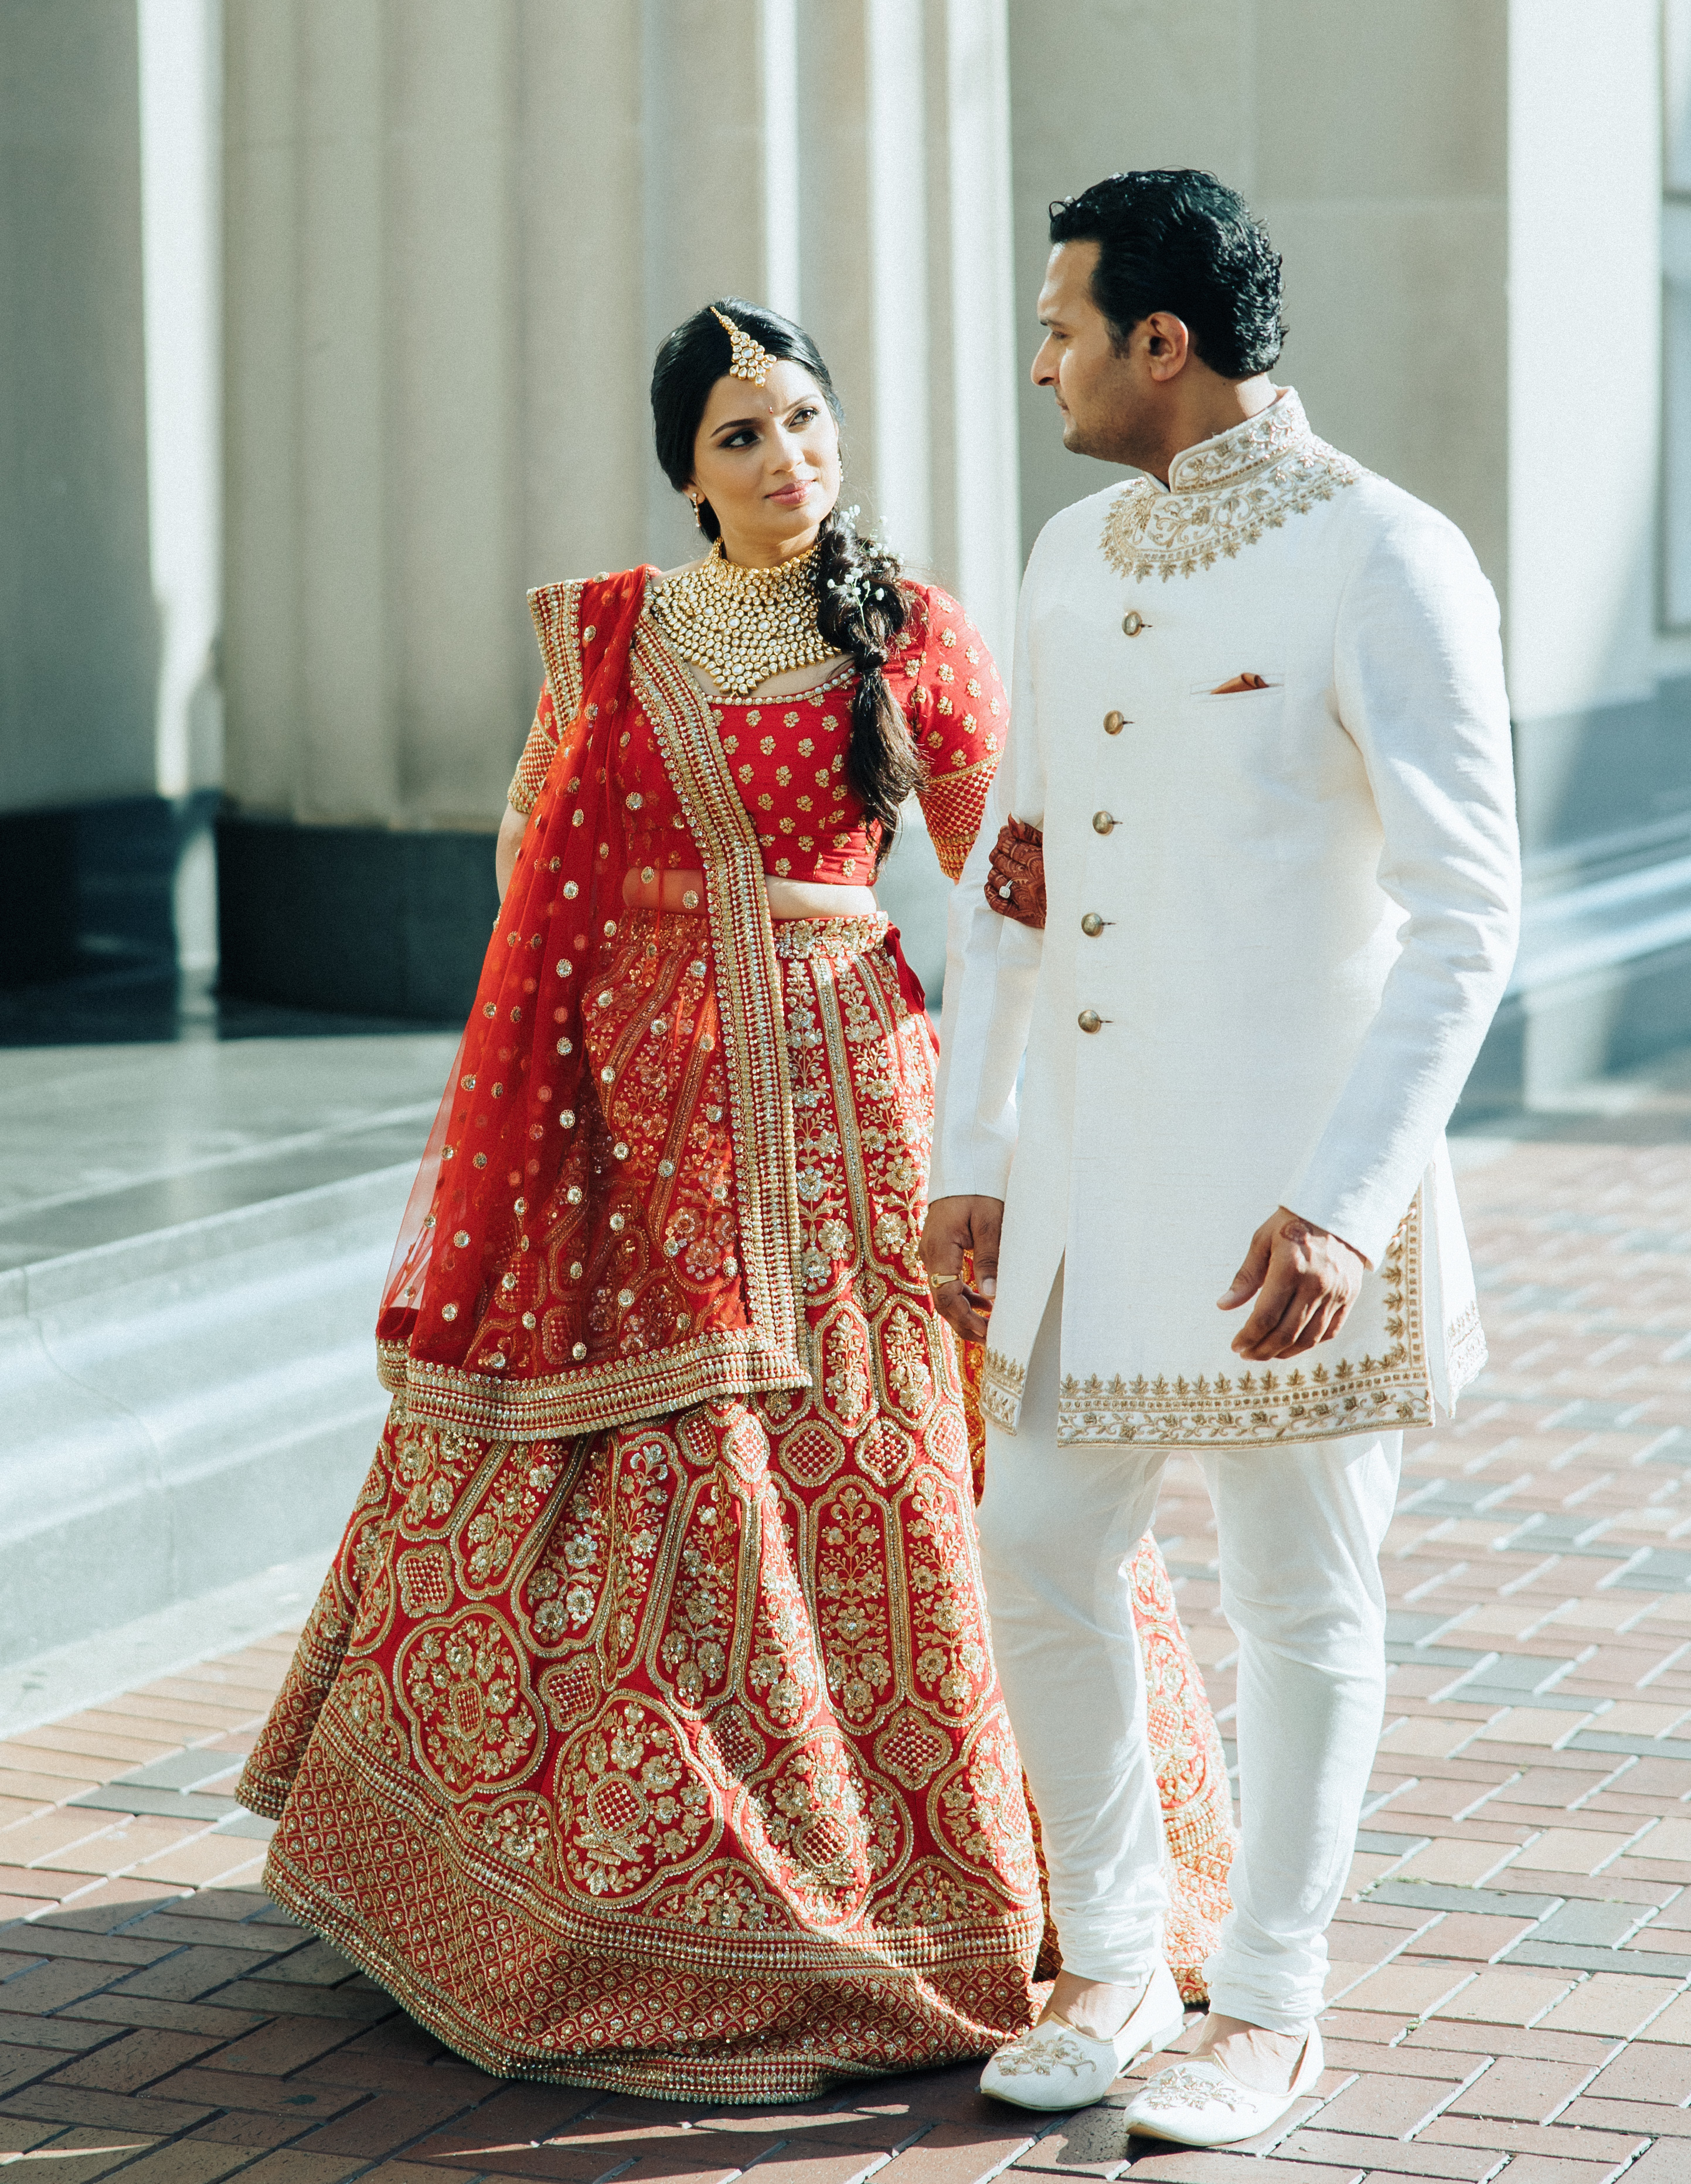 The bride and groom hold hands while dressed in traditional Hindu attire outside their wedding venue. 